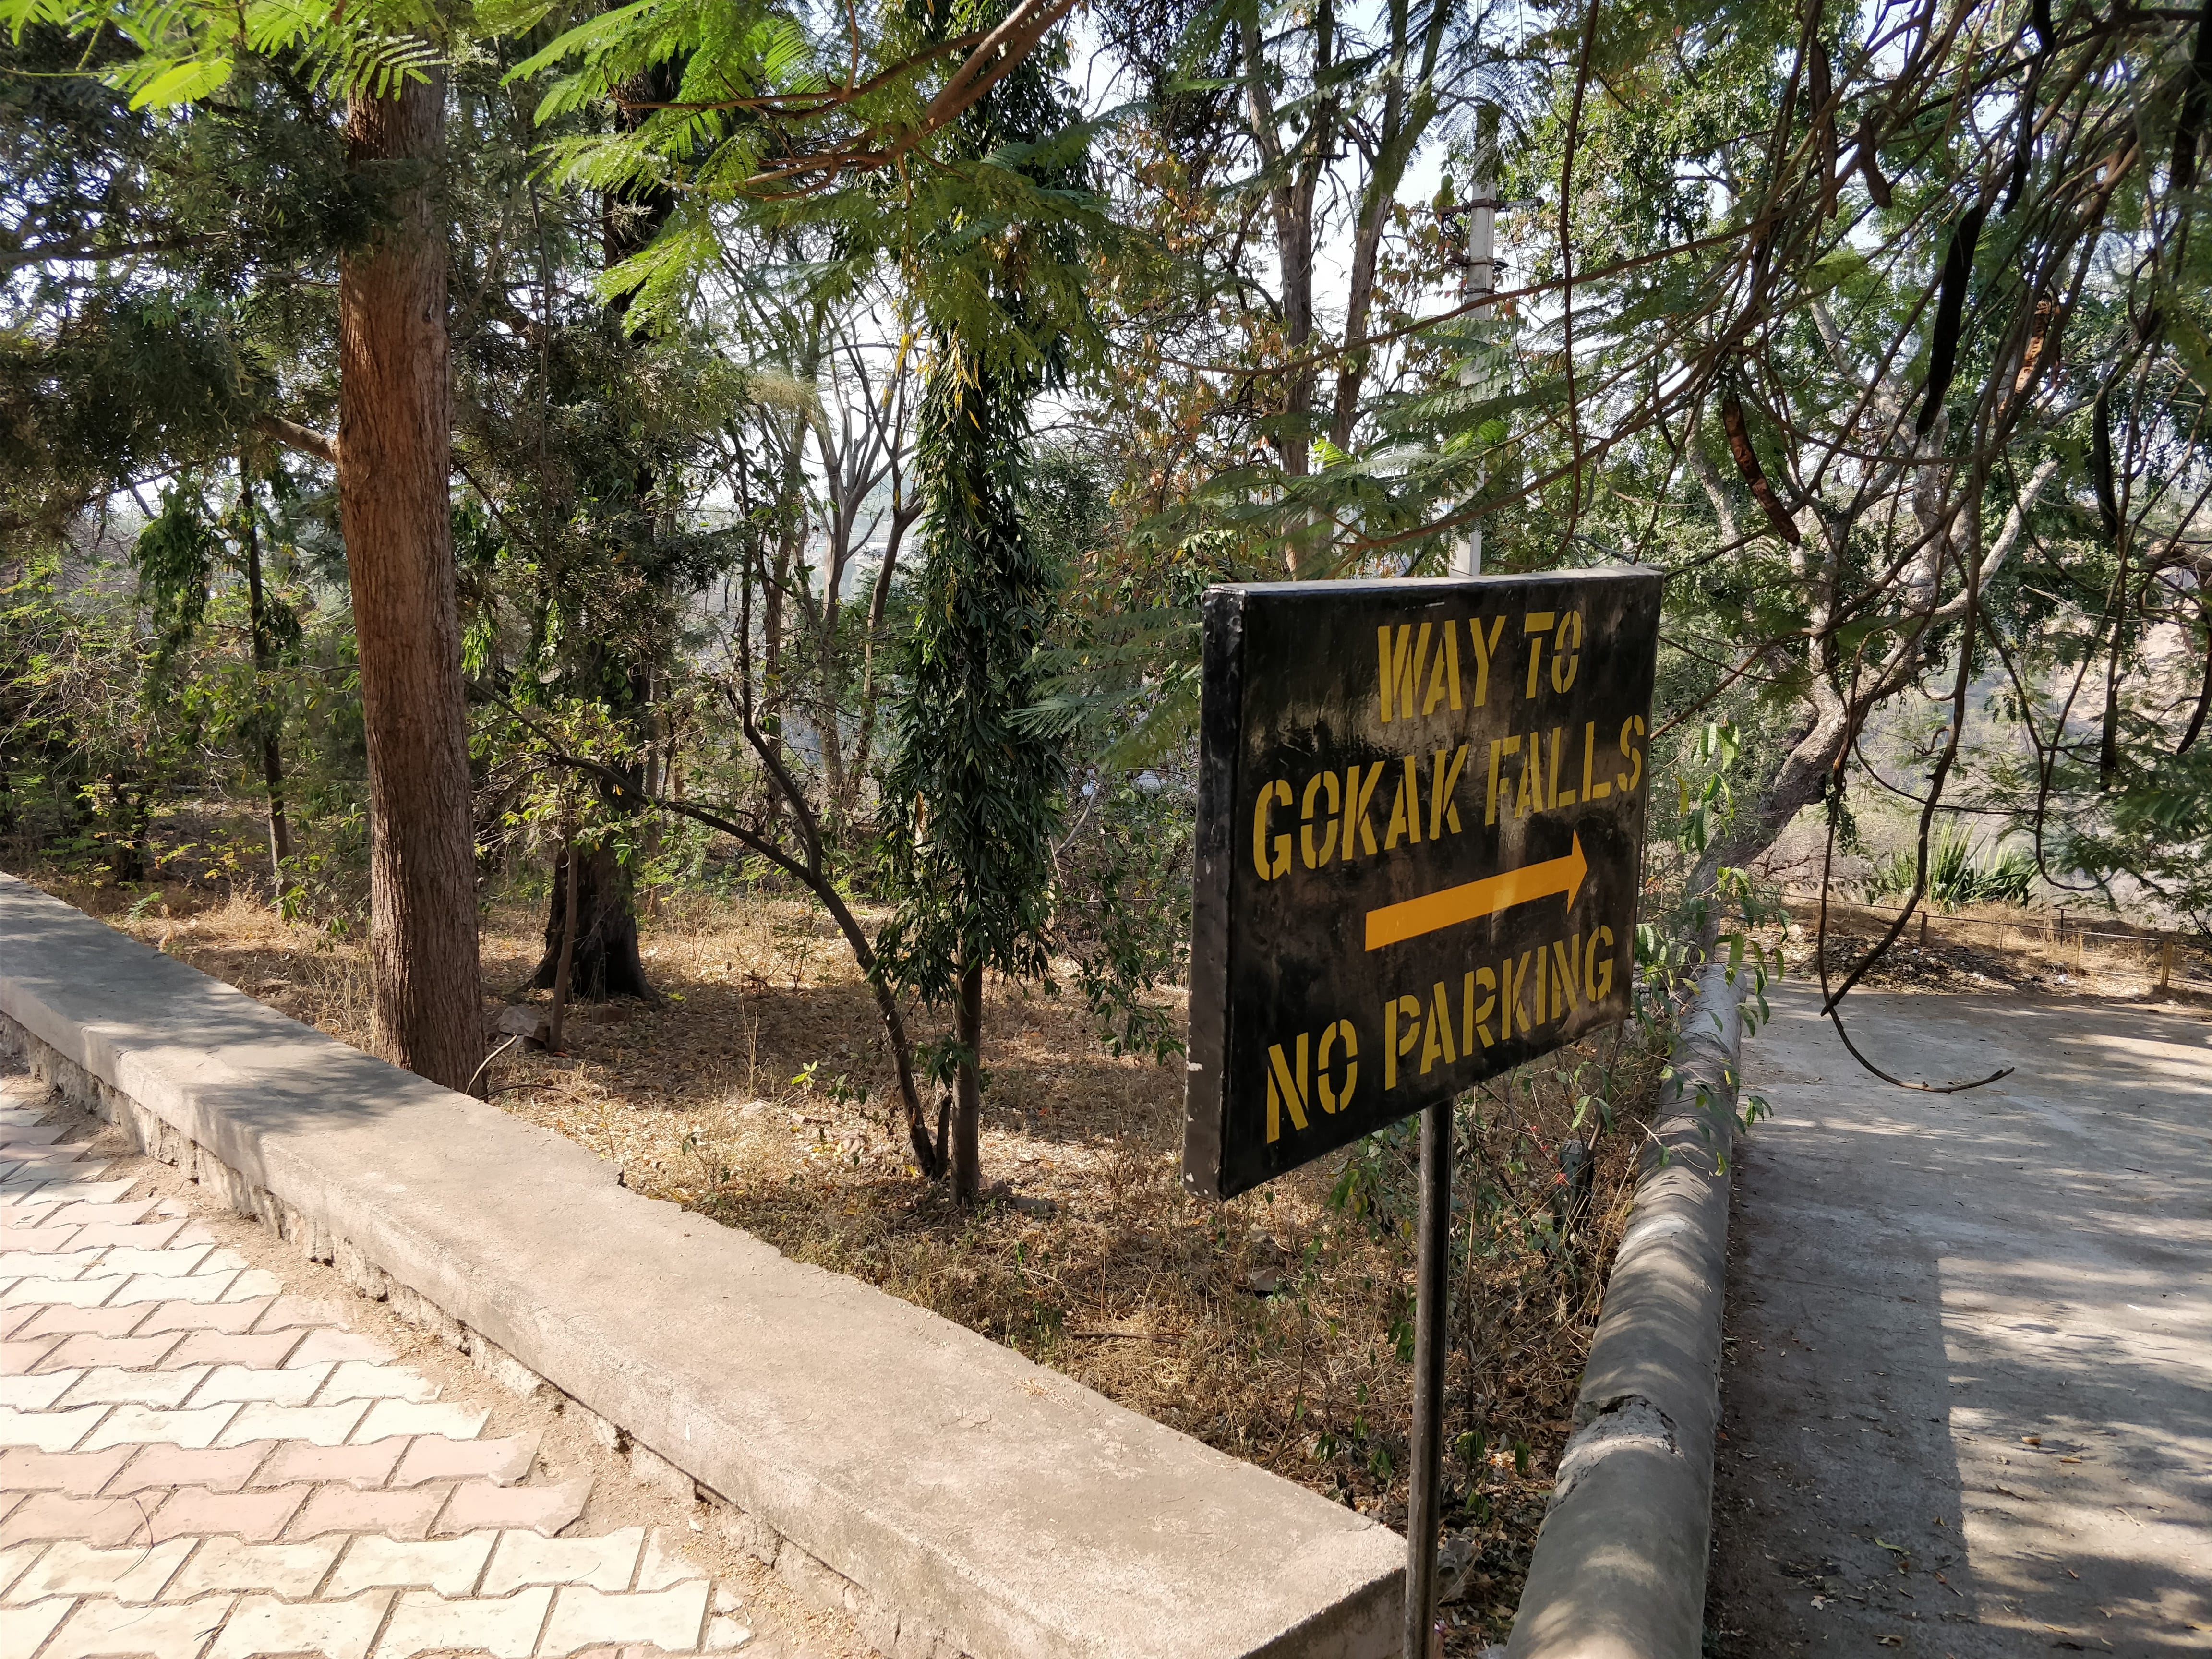 Gokak falls sign board to go to the base of the falls